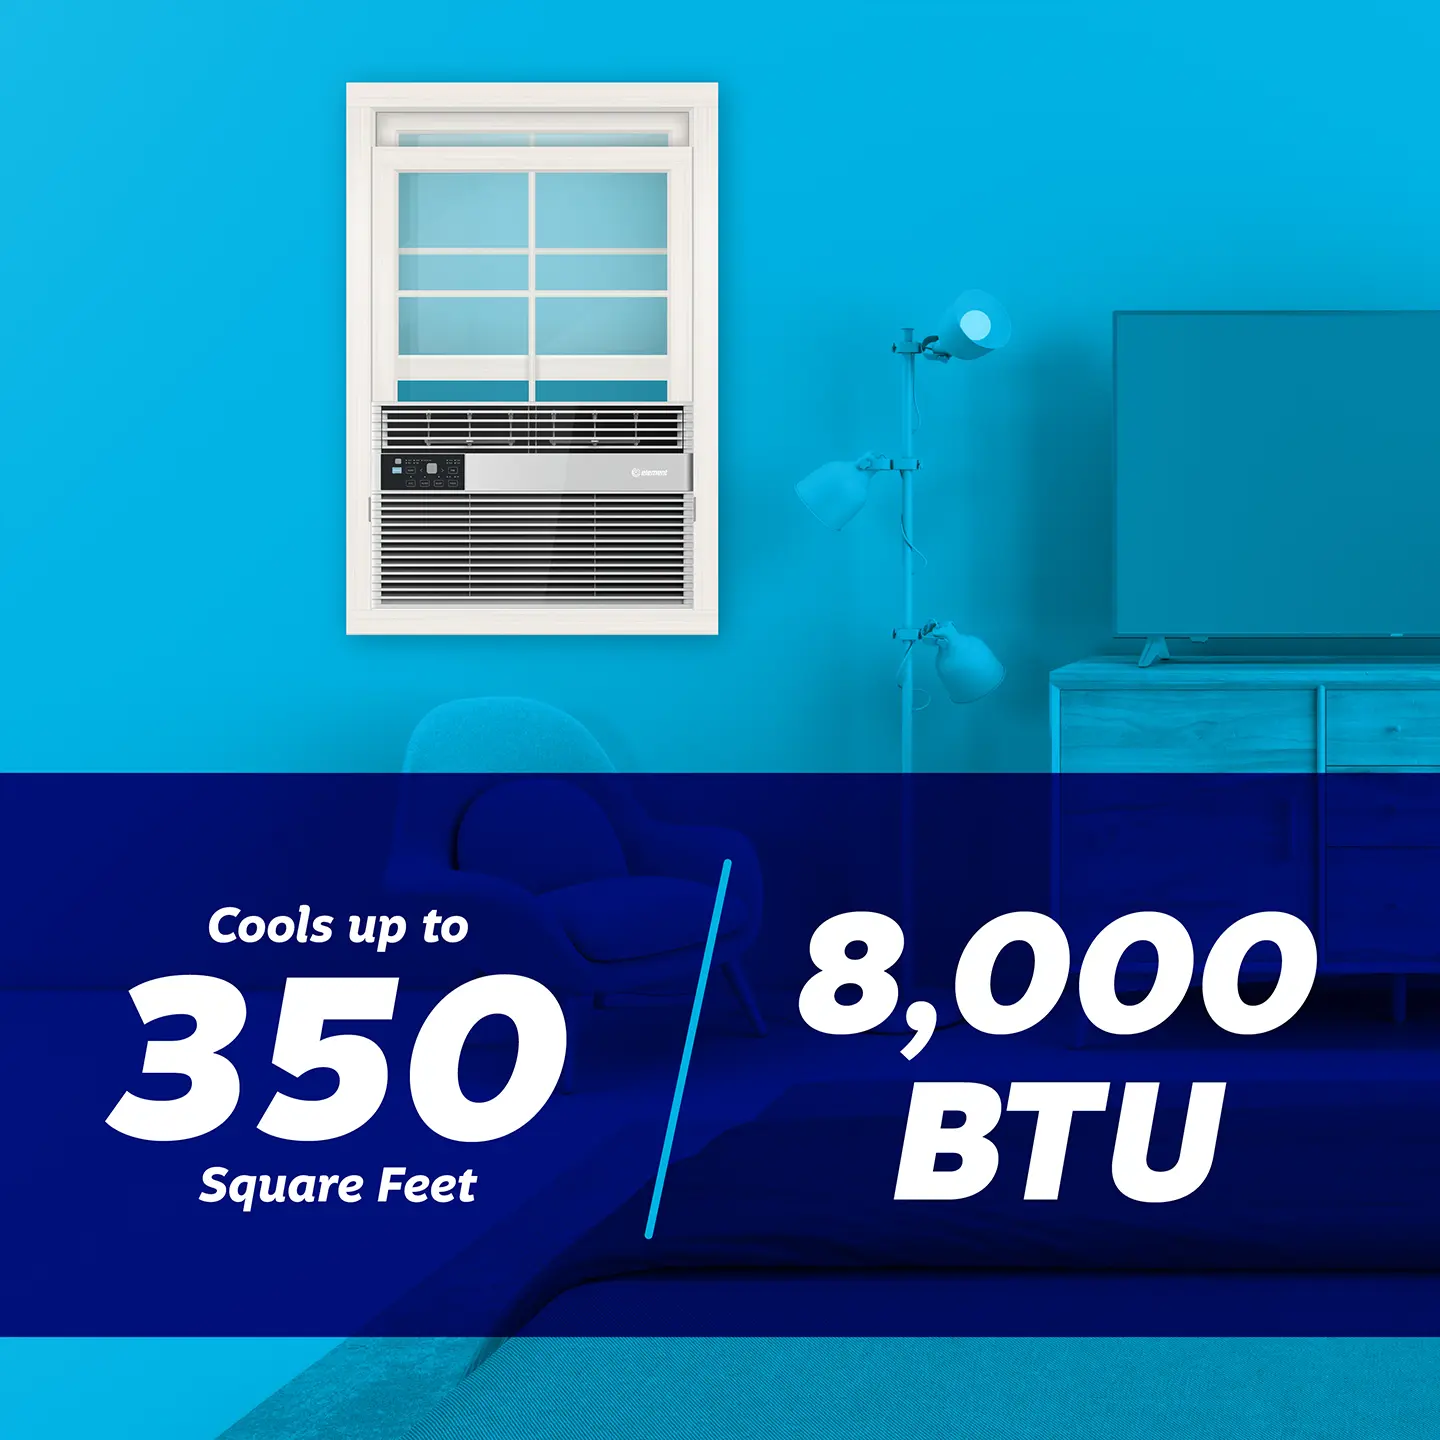 8,000 BTU - cools up to 350 square feet